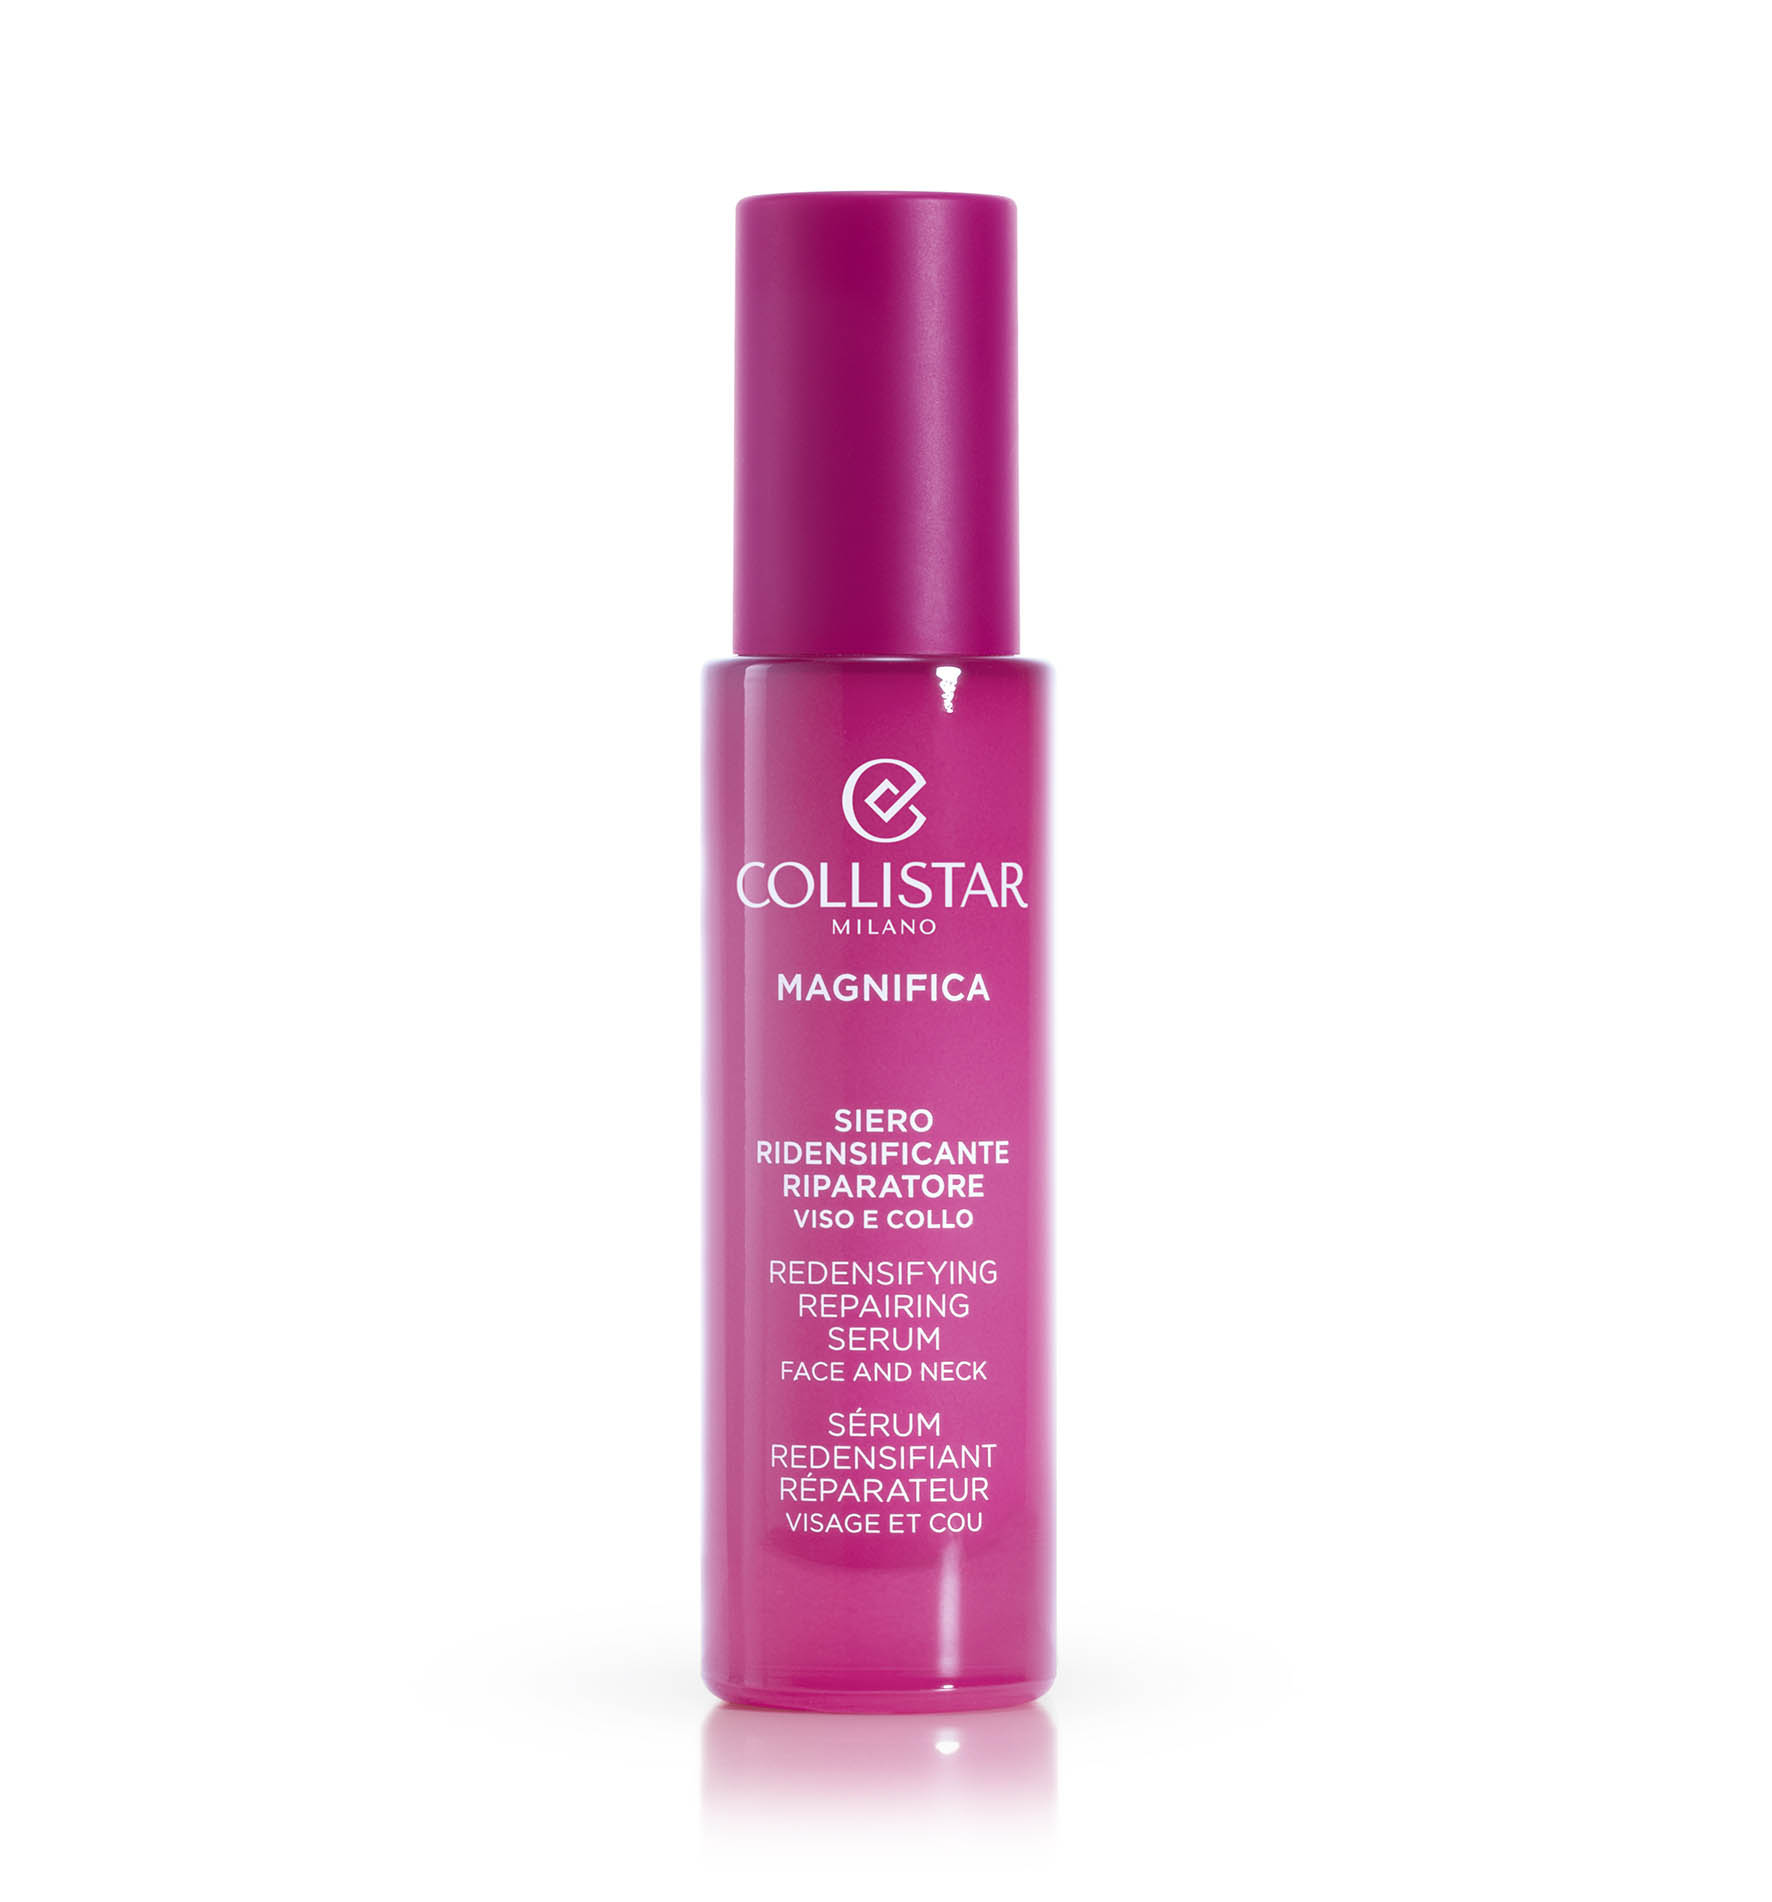 MAGNIFICA REDENSIFYING REPAIRING SERUM FACE AND NECK - Serums | Collistar - Shop Online Ufficiale